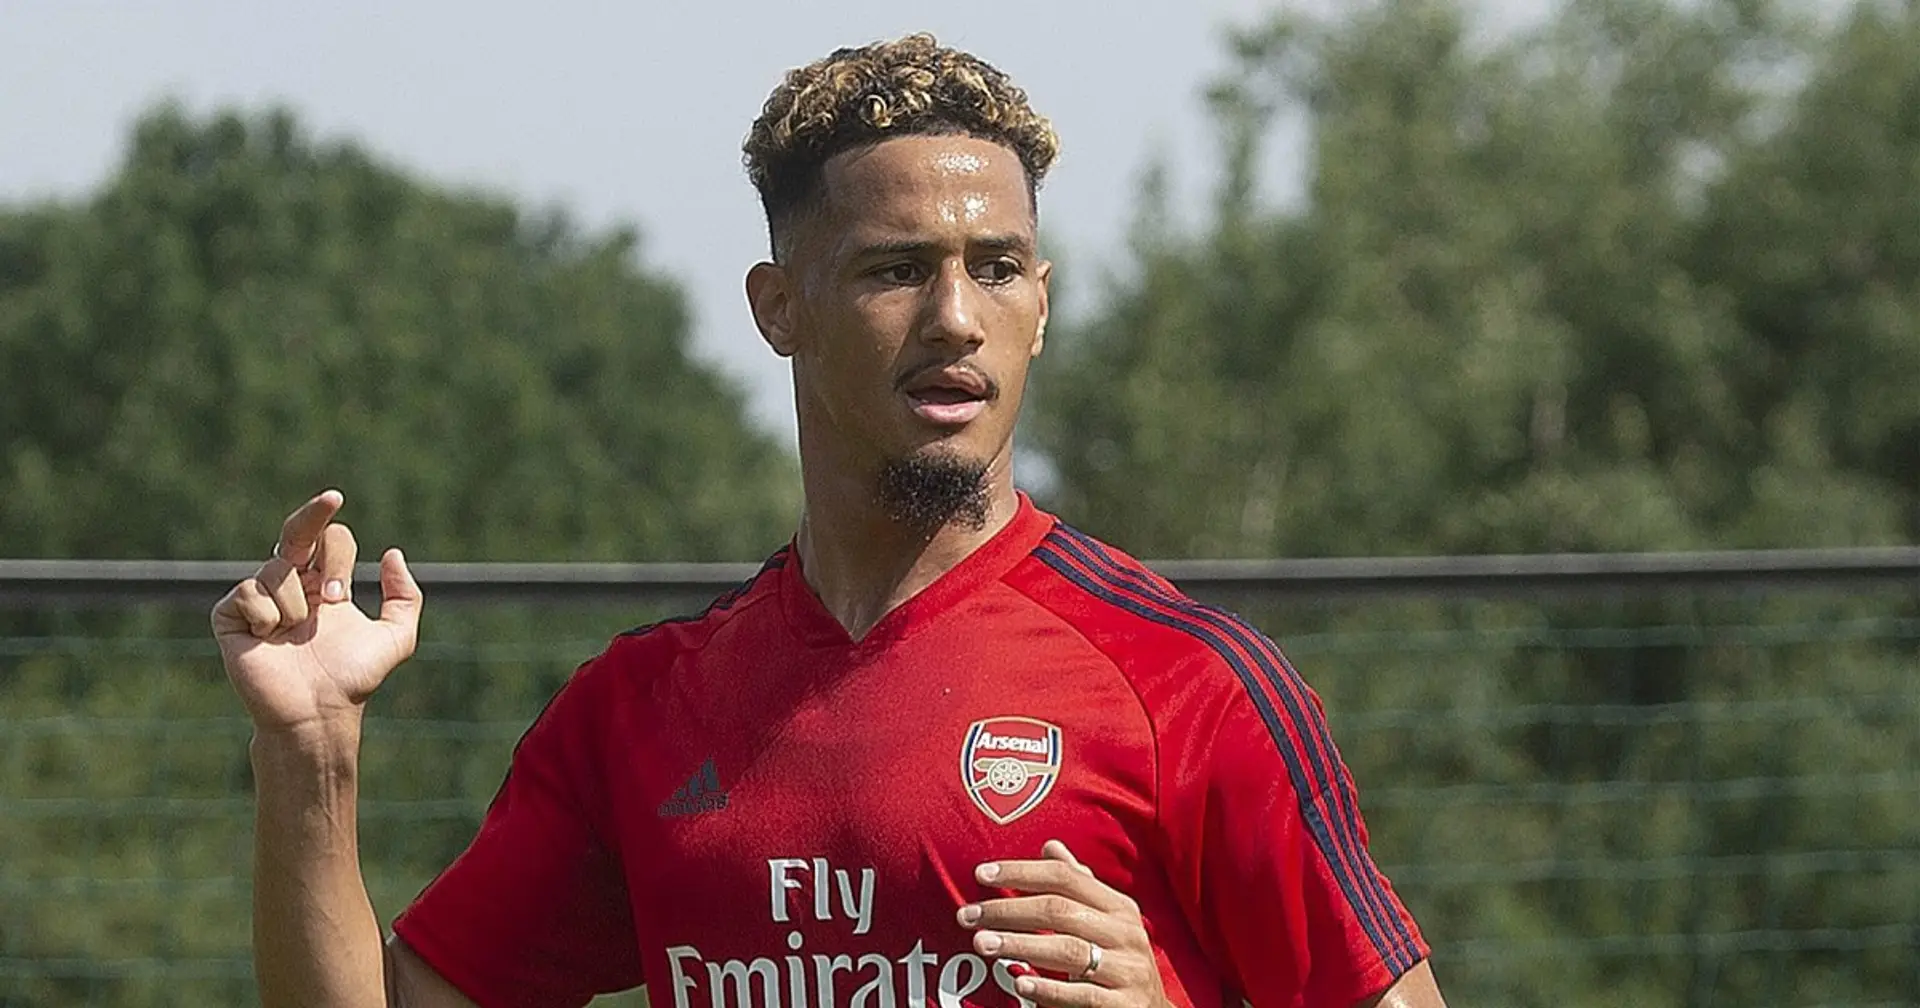 Arsenal consider loaning out William Saliba to one of Championship clubs (reliability: 4 stars)